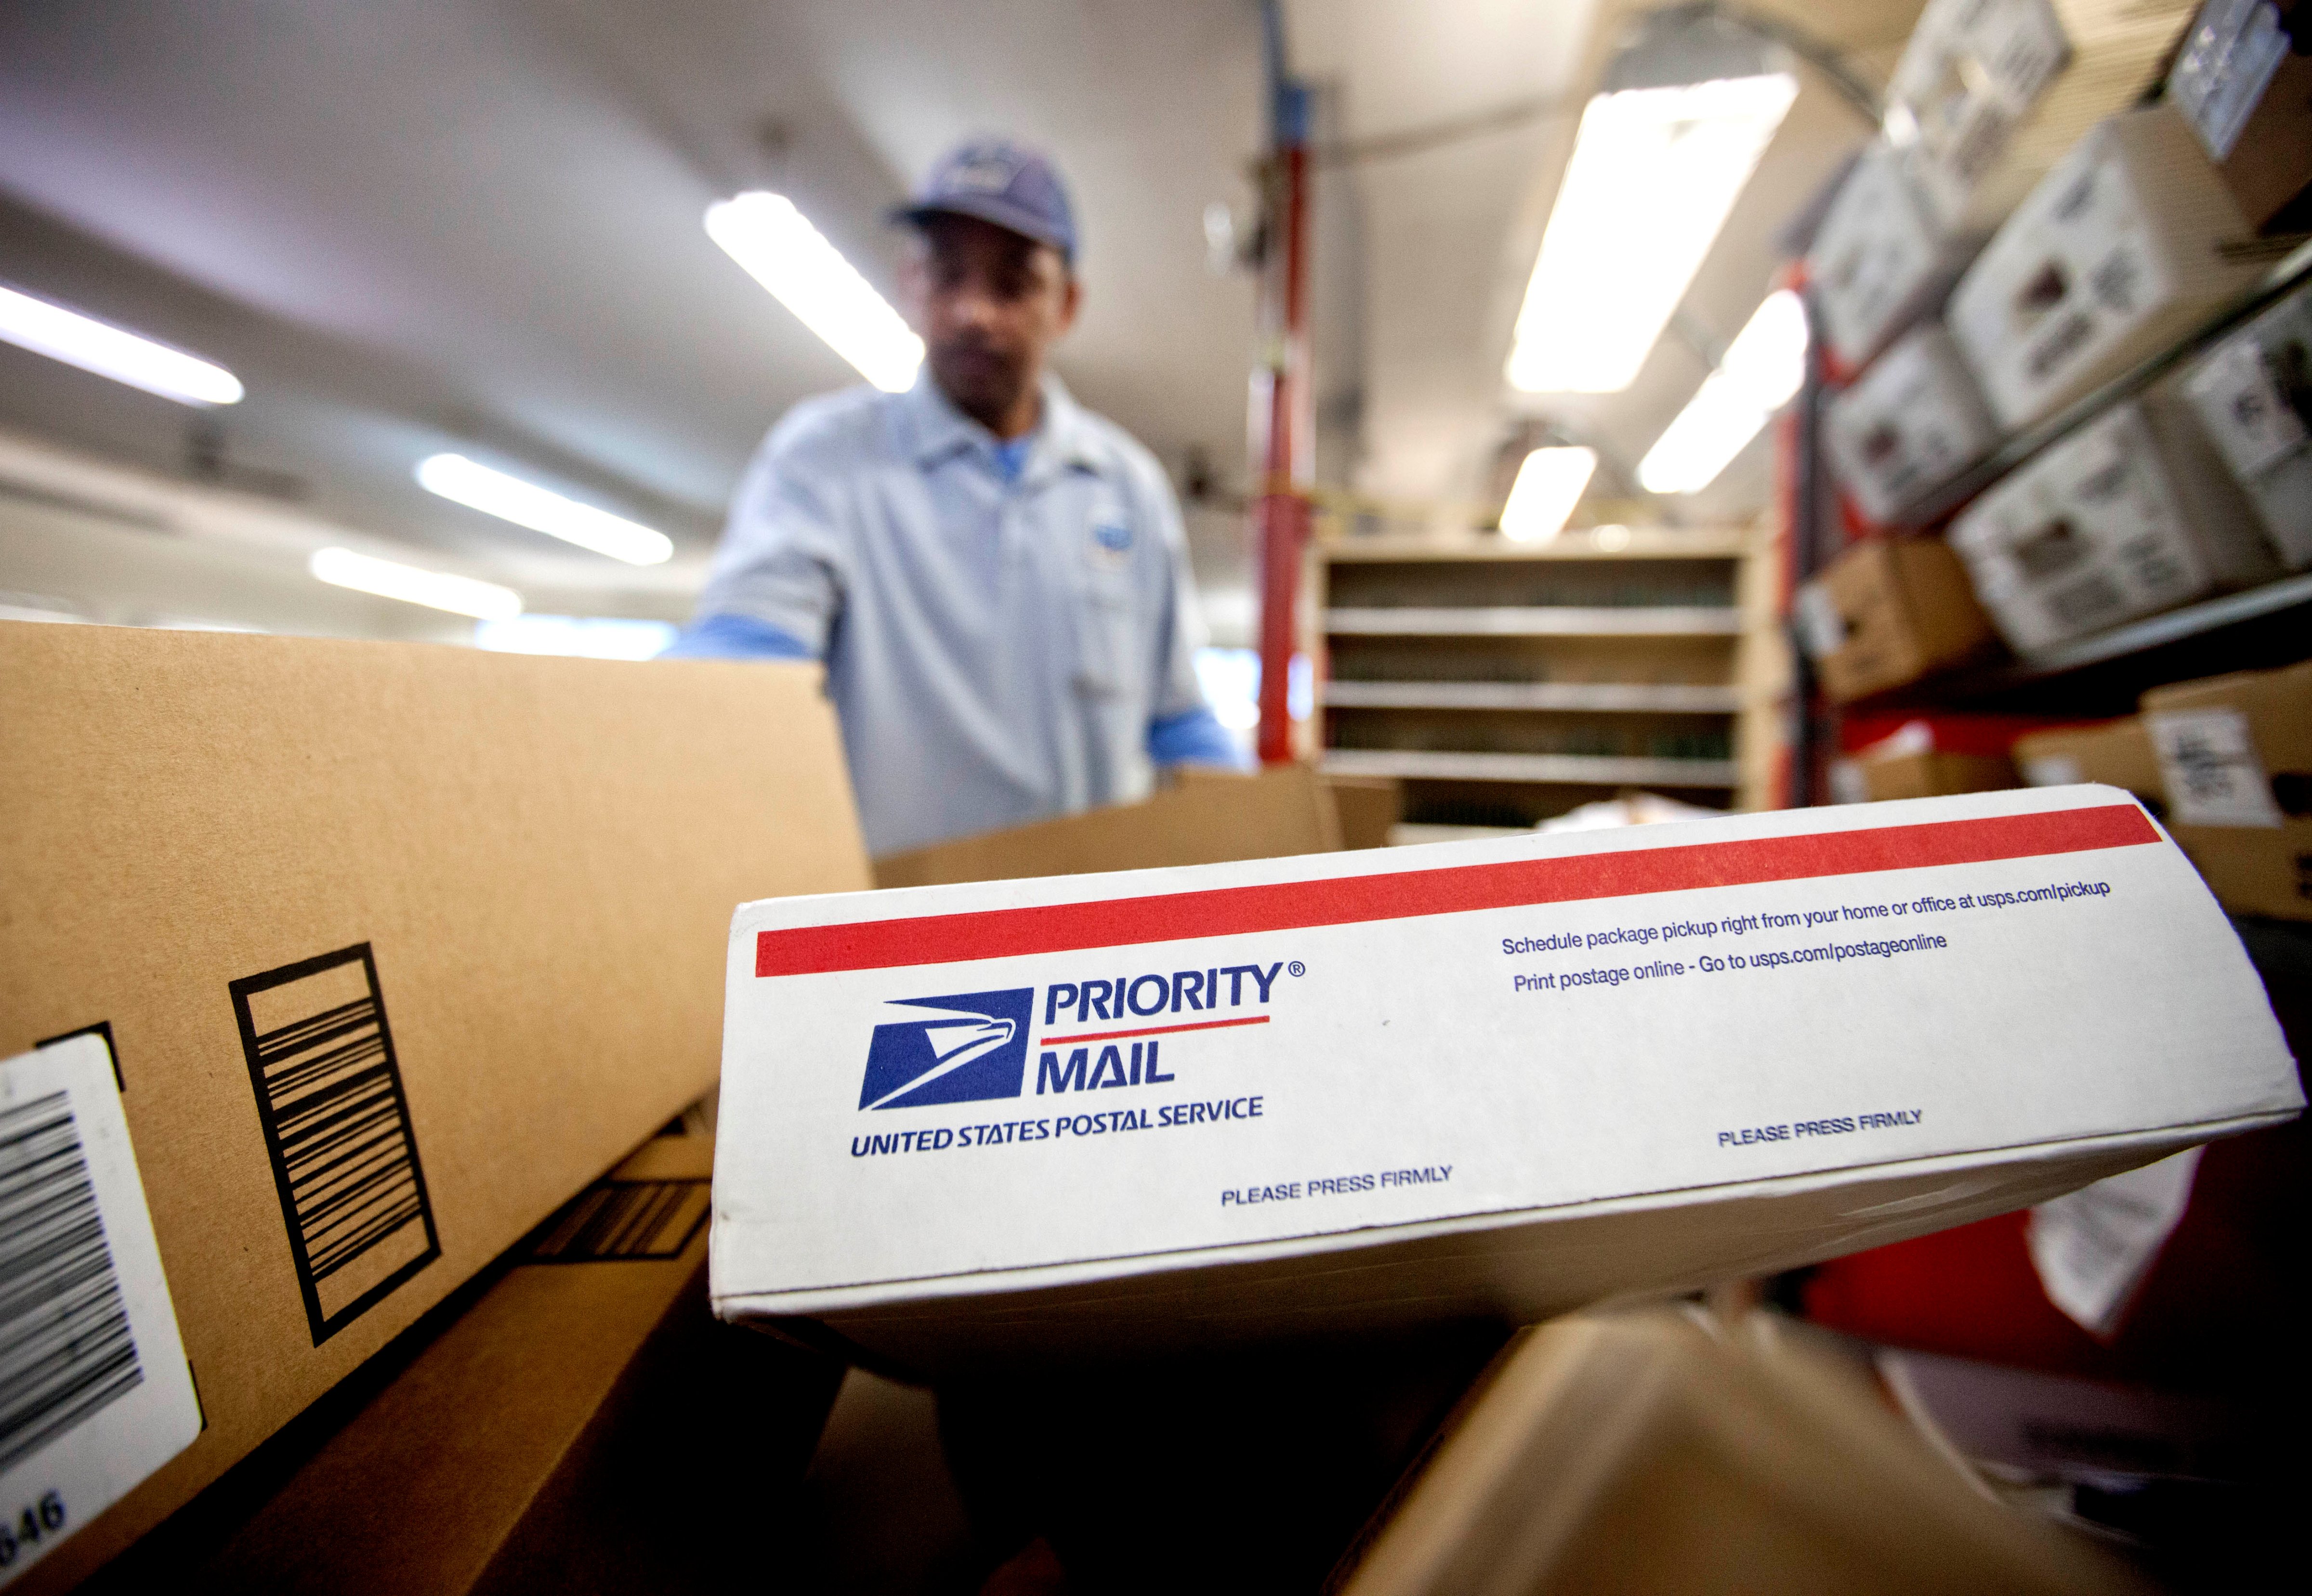 Packages wait to be sorted as a postal worker gathers mail to load into his truck before making a delivery run. The U.S. Postal Service recently announced that it will deliver packages seven days a week through Christmas Day. (David Goldman—AP)